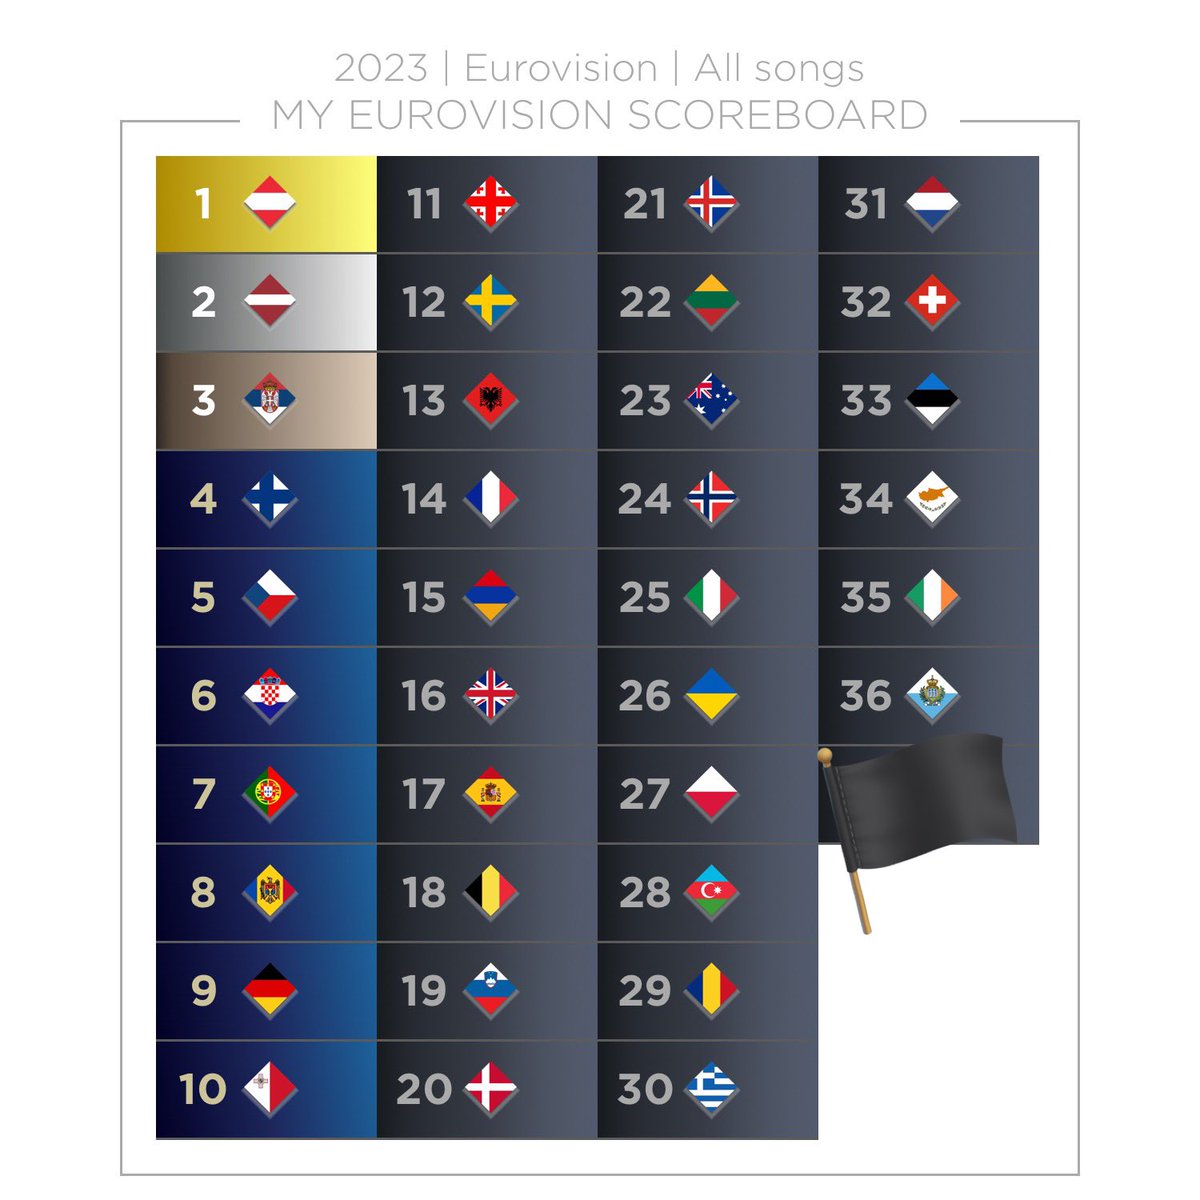 1 year later and here’s my ranking of Eurovision 2023. Drop yours